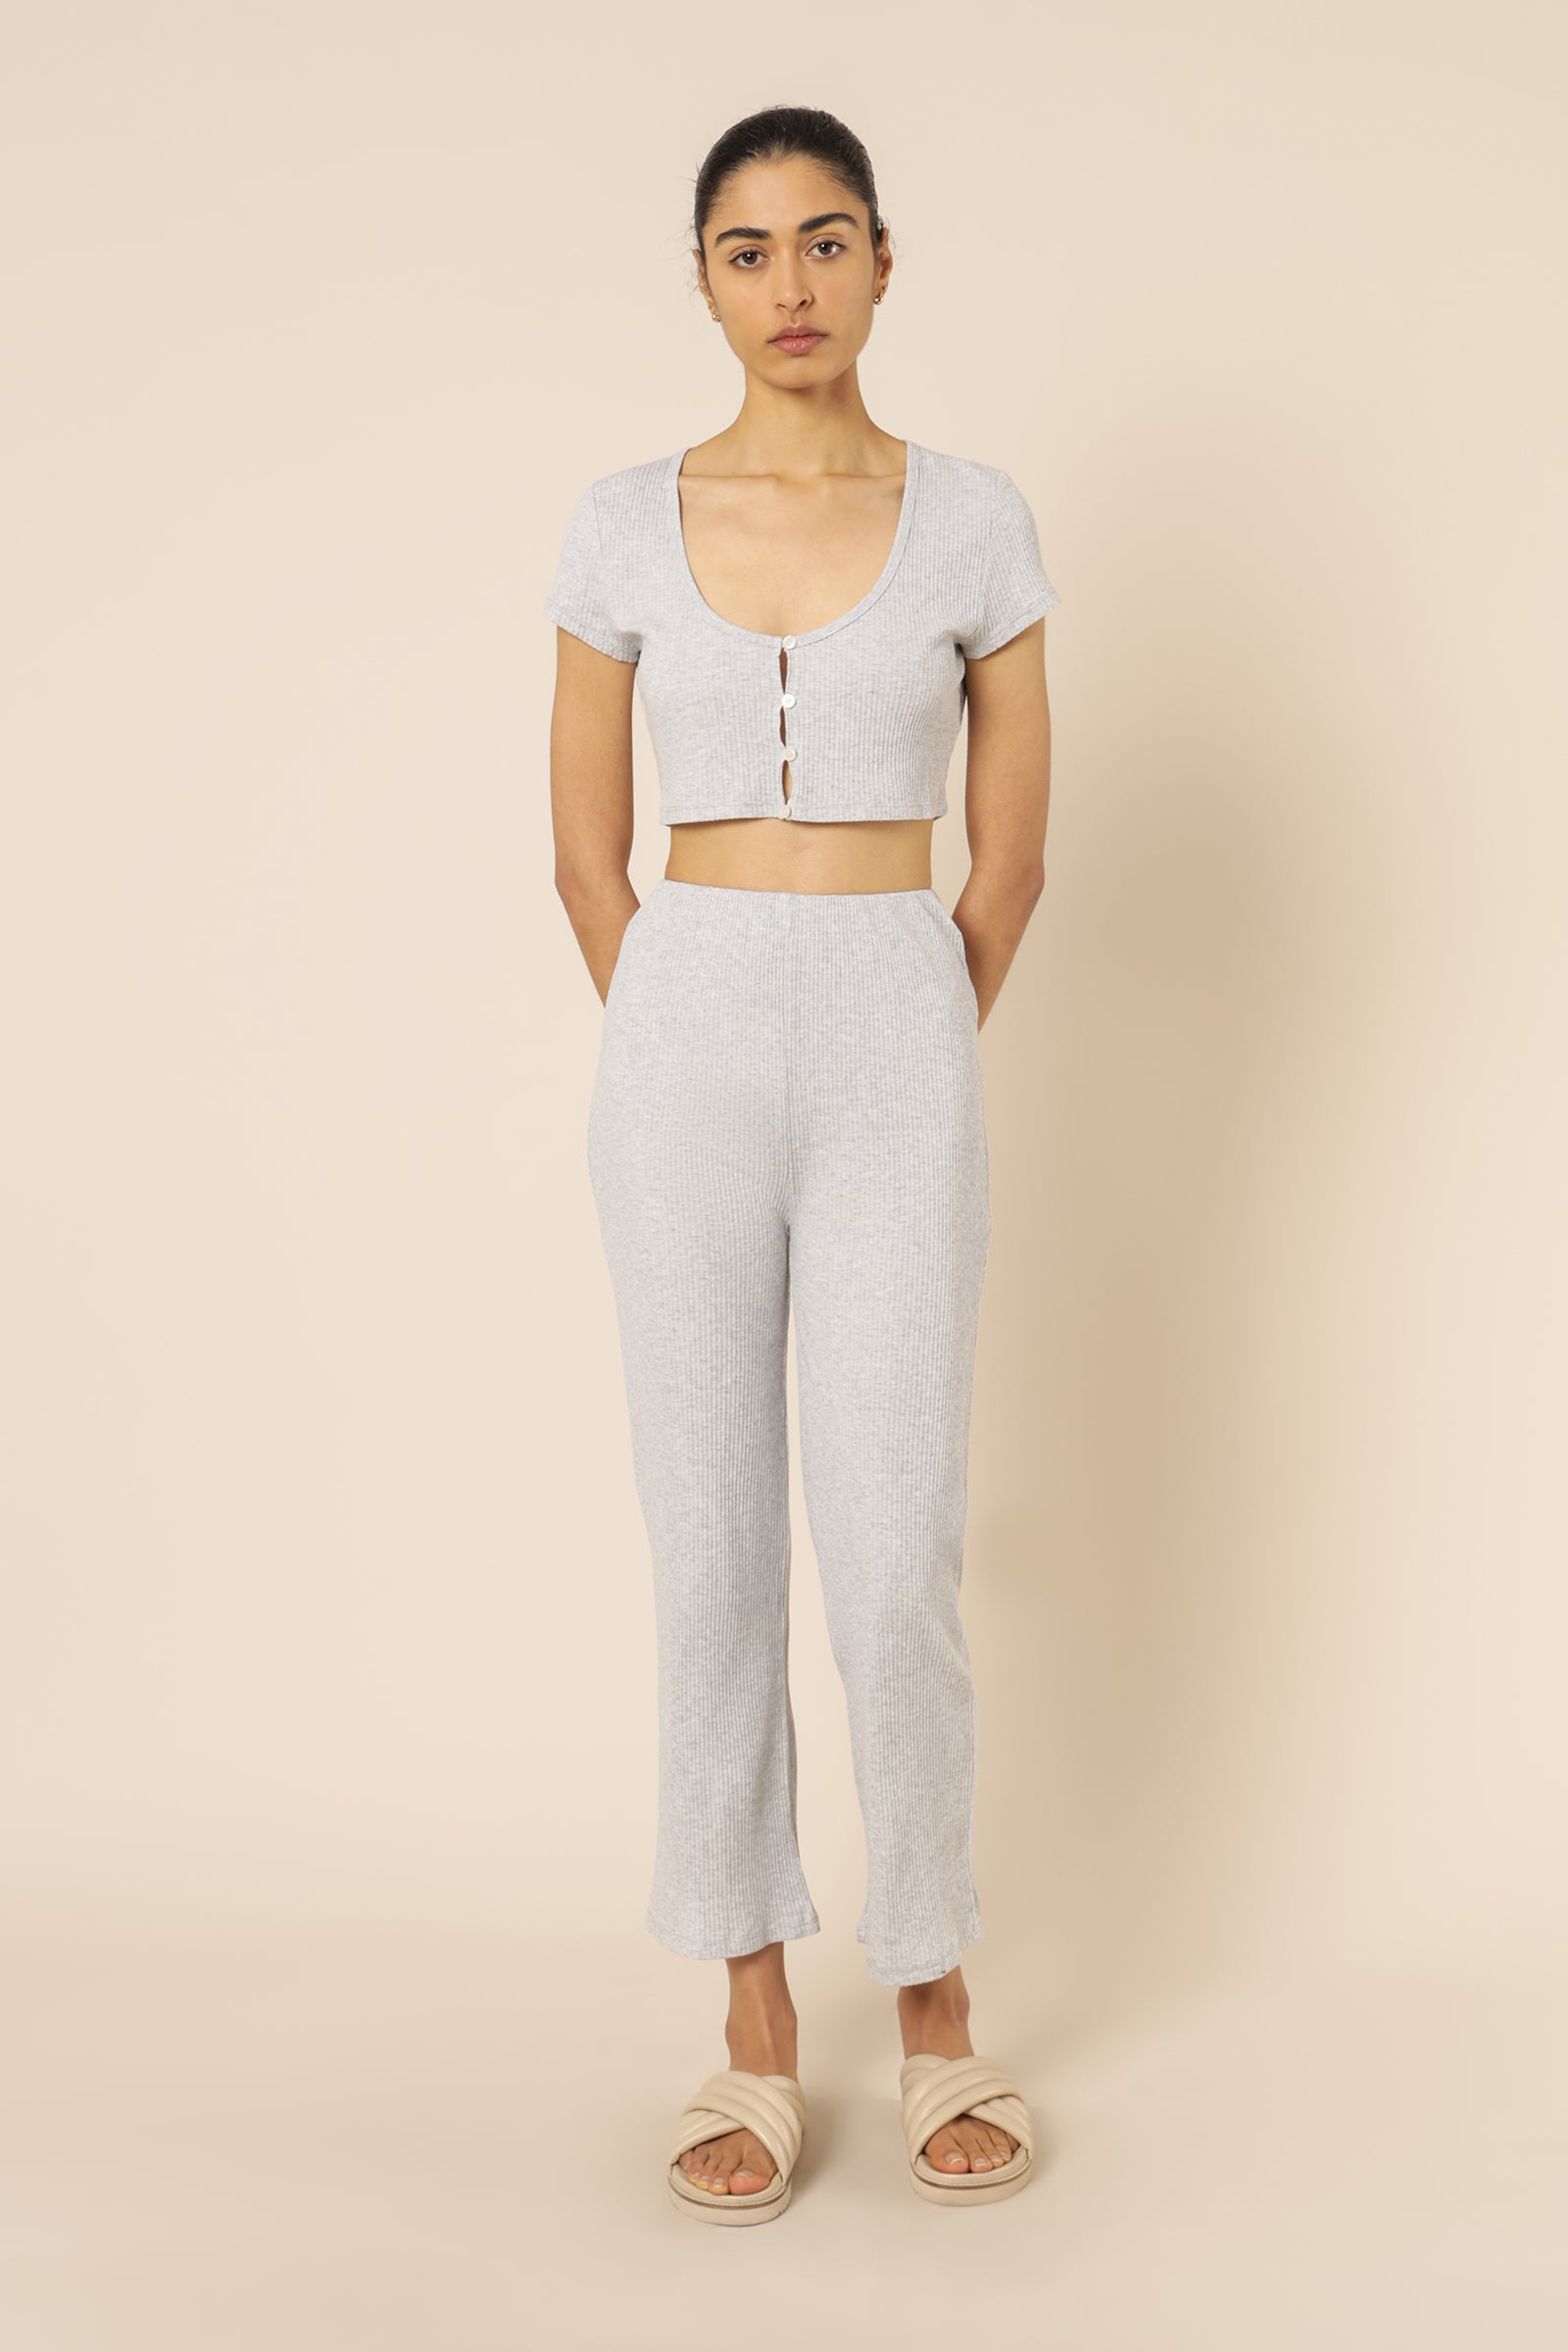 Nude Lucy nude ribbed lounge culotte grey marle pants